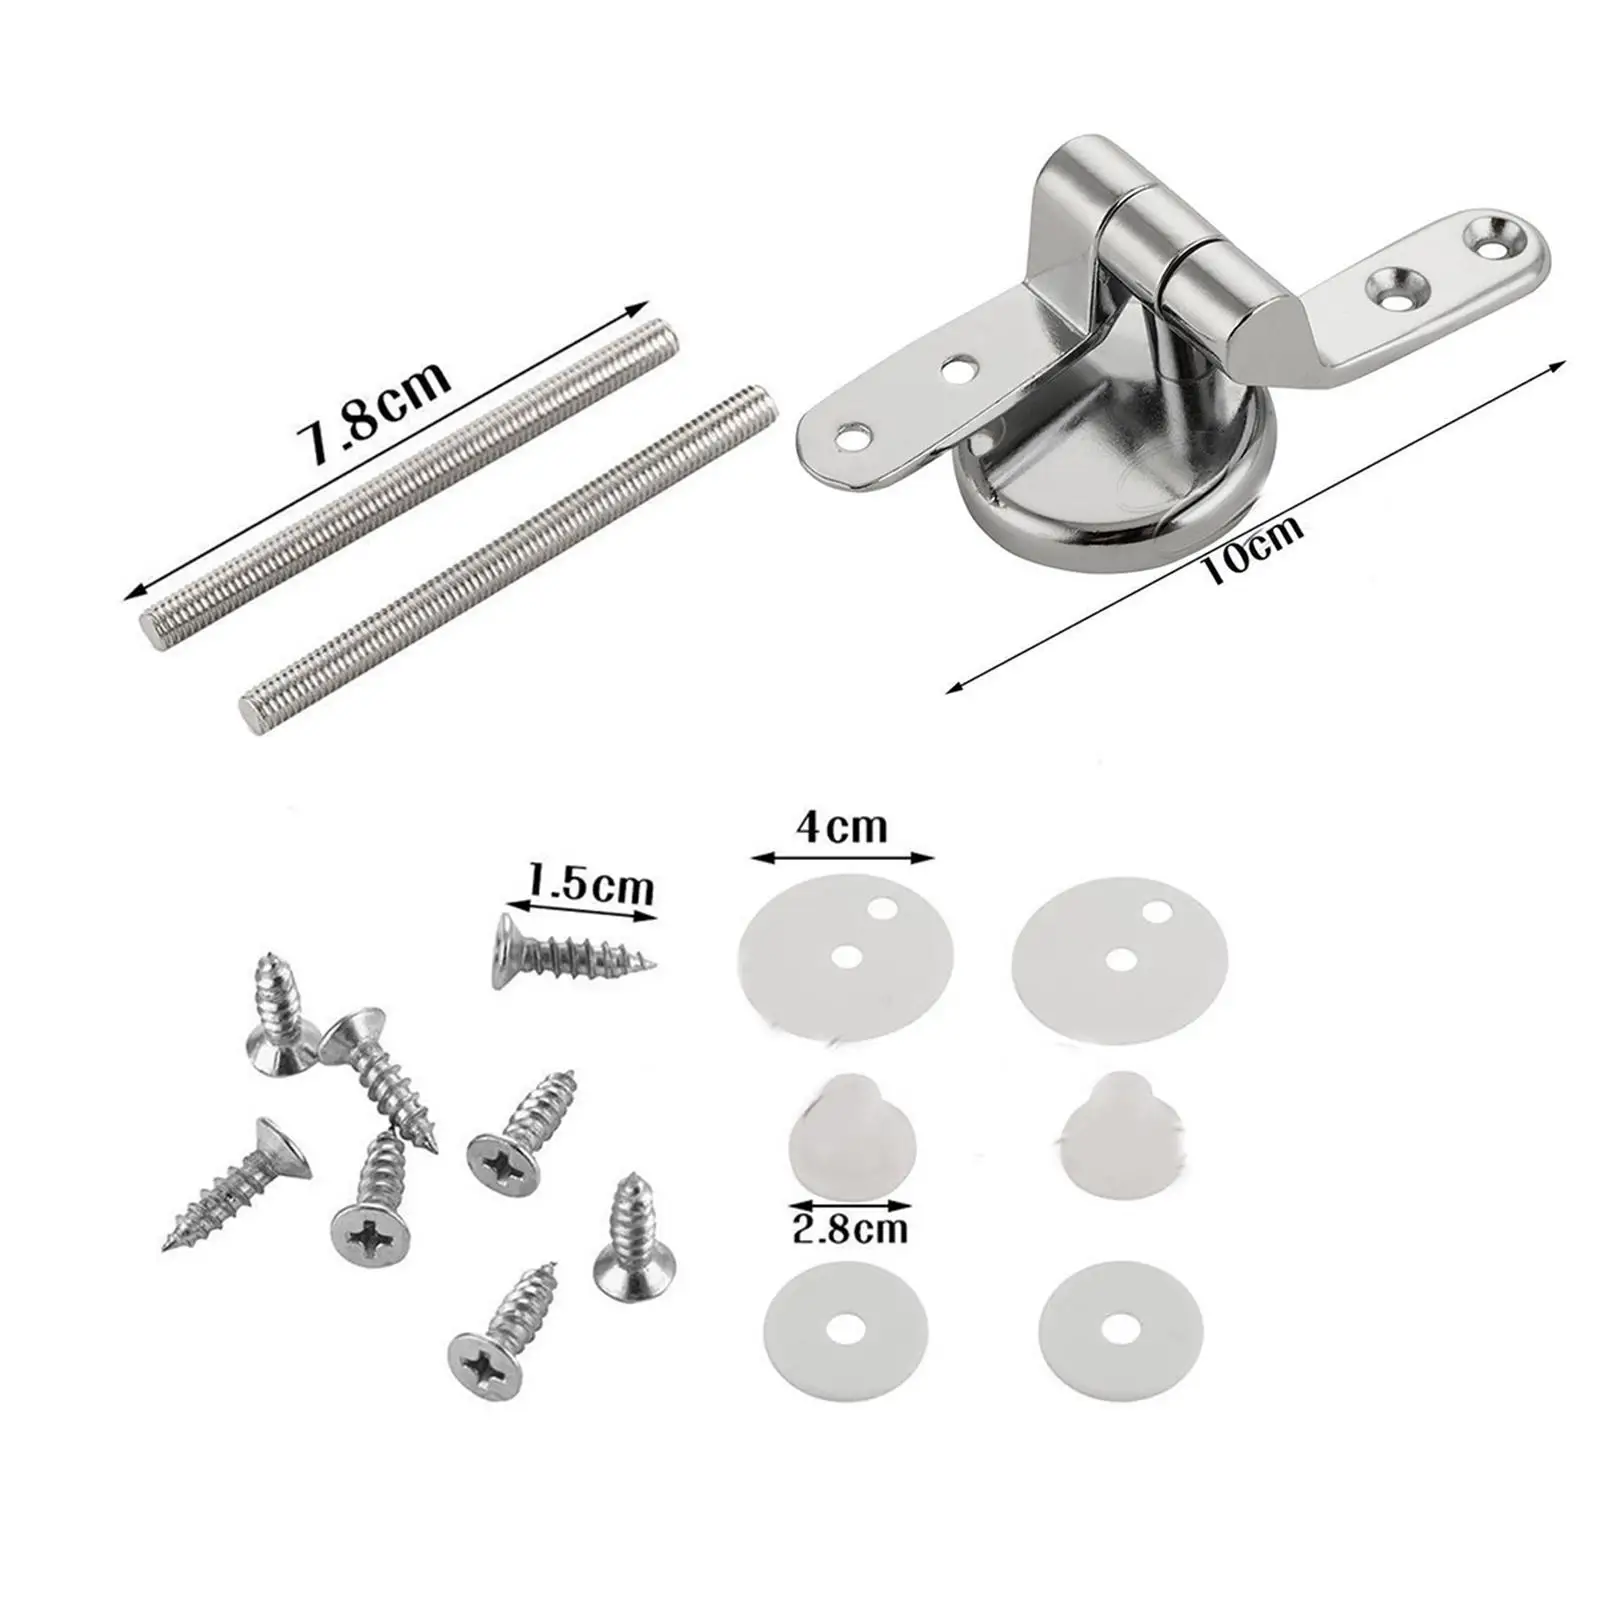 Universal Toilet Seats Hinges for Toilet Lid with Screws and Accessories Zinc Alloy Finished Simple to Install Toilet Repairing